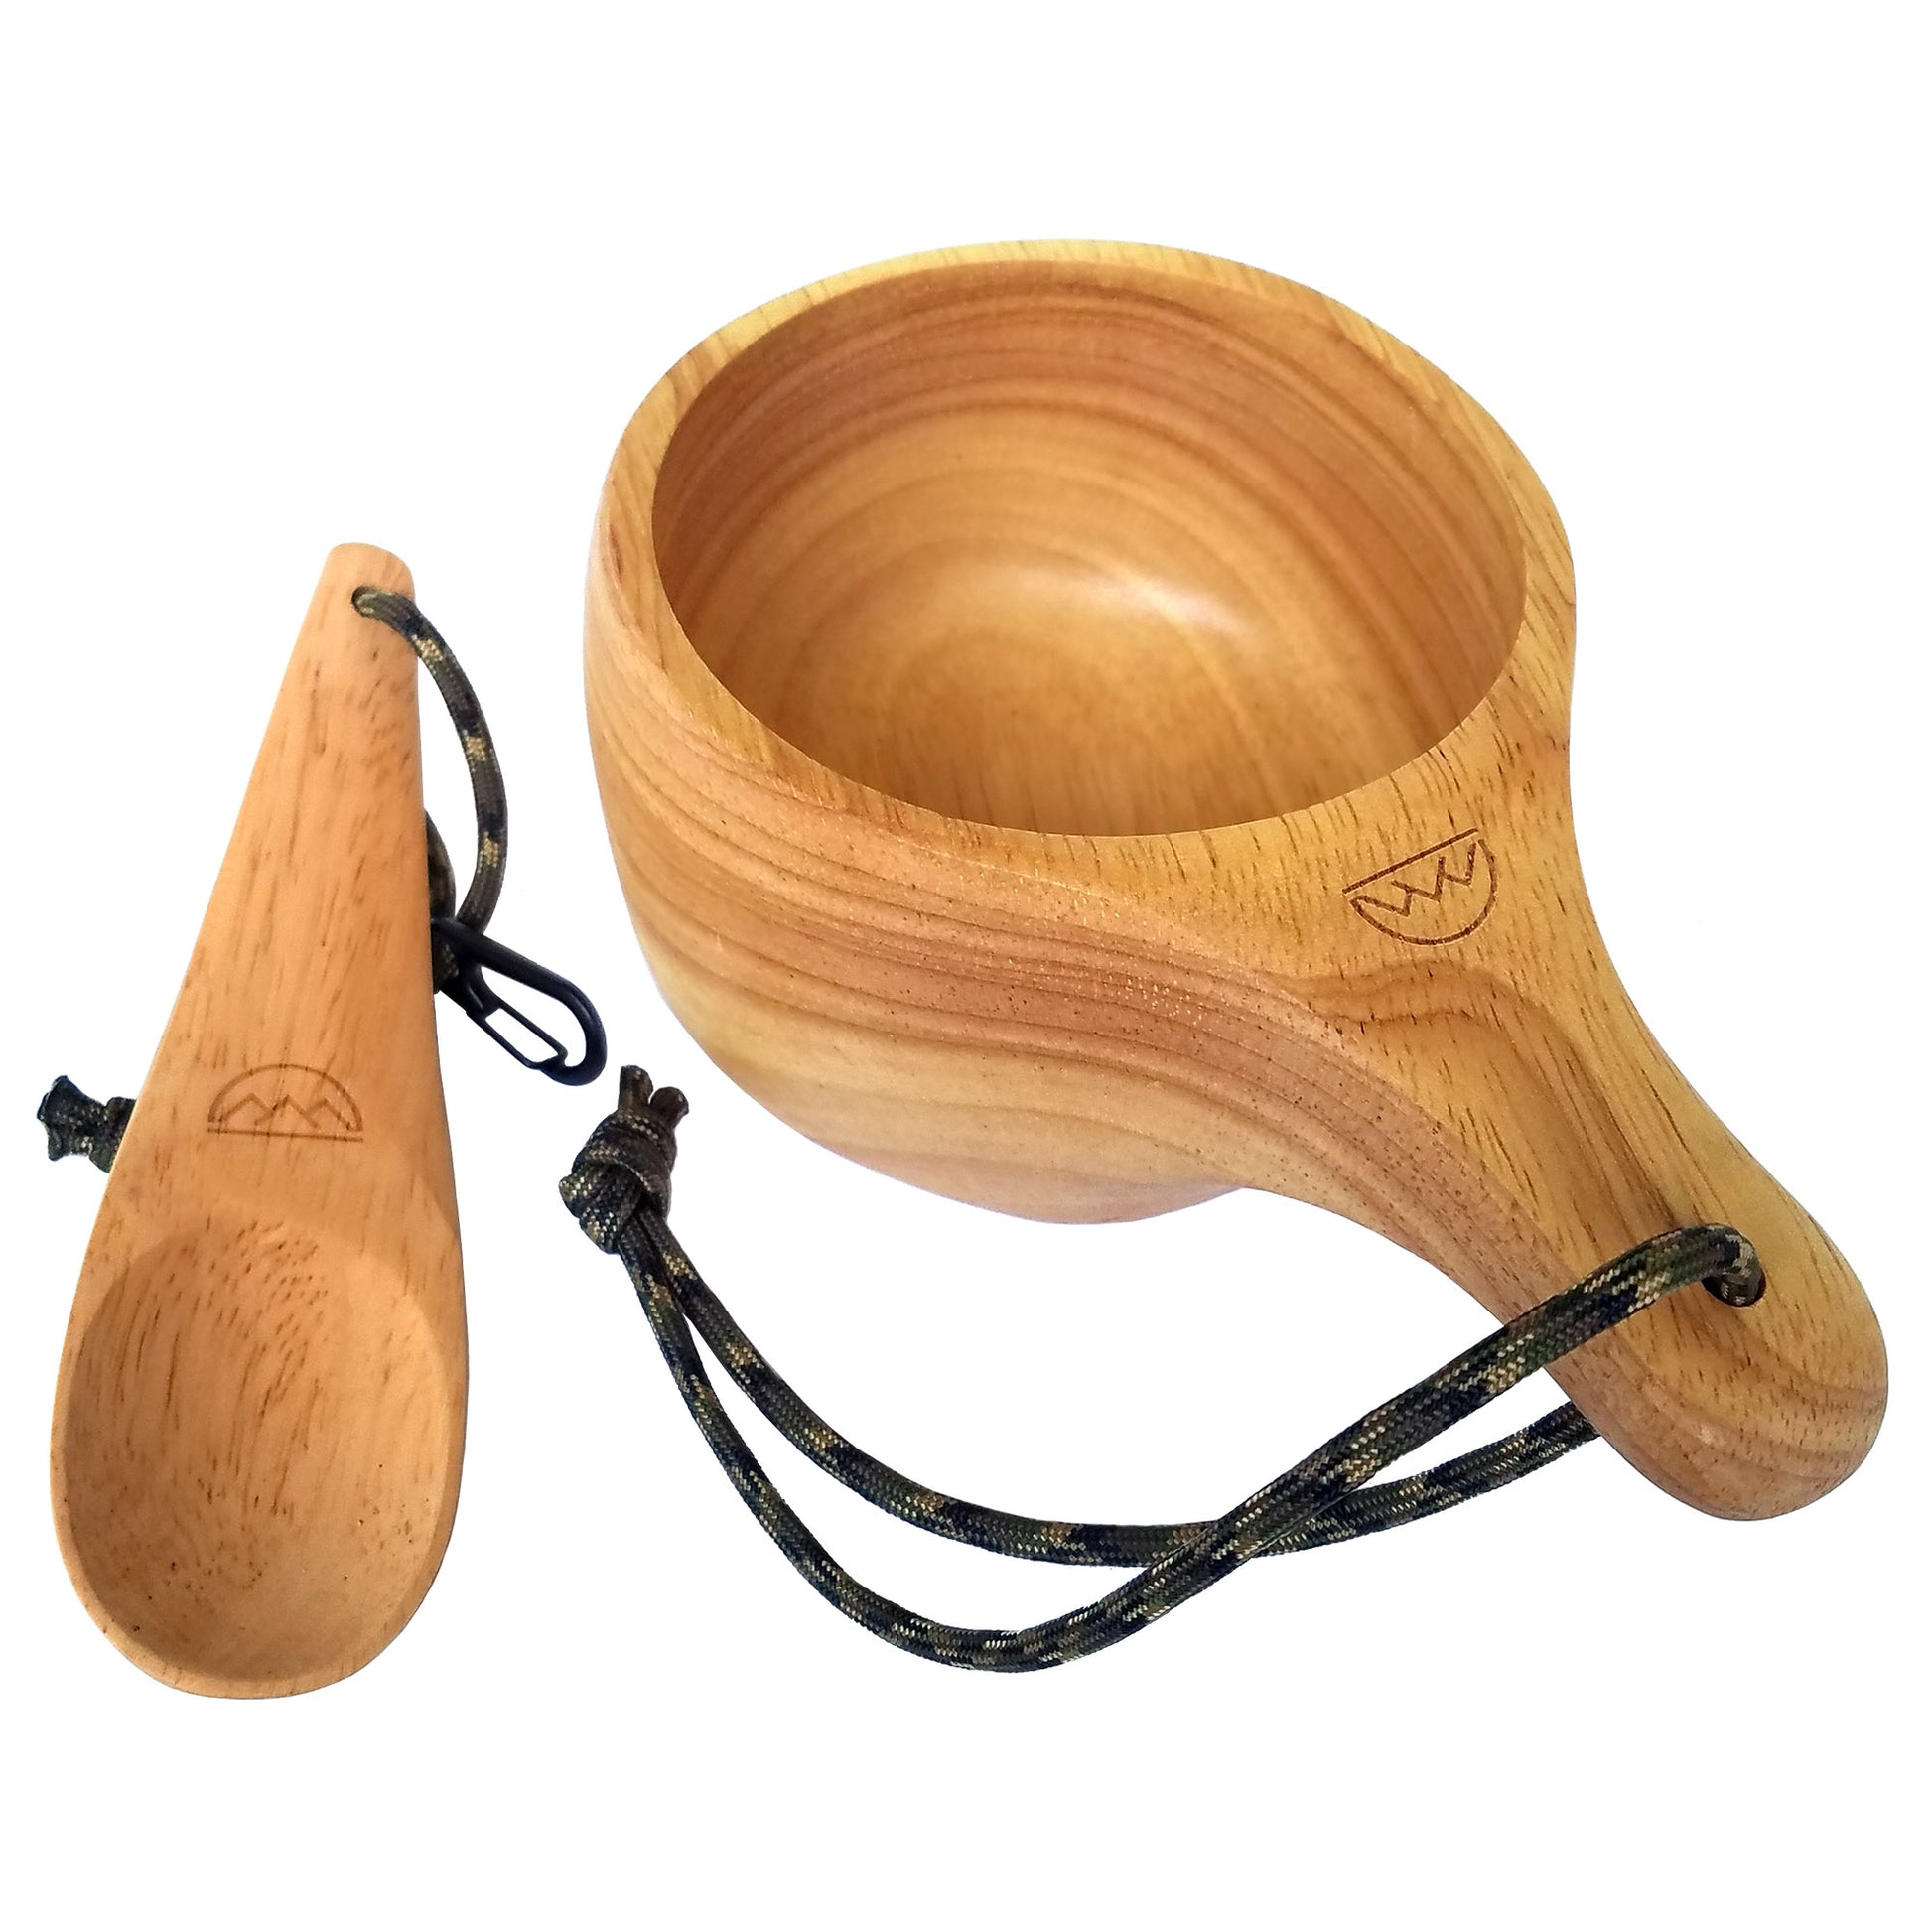 What is a kuksa ? Origins, carving, wood and preservation